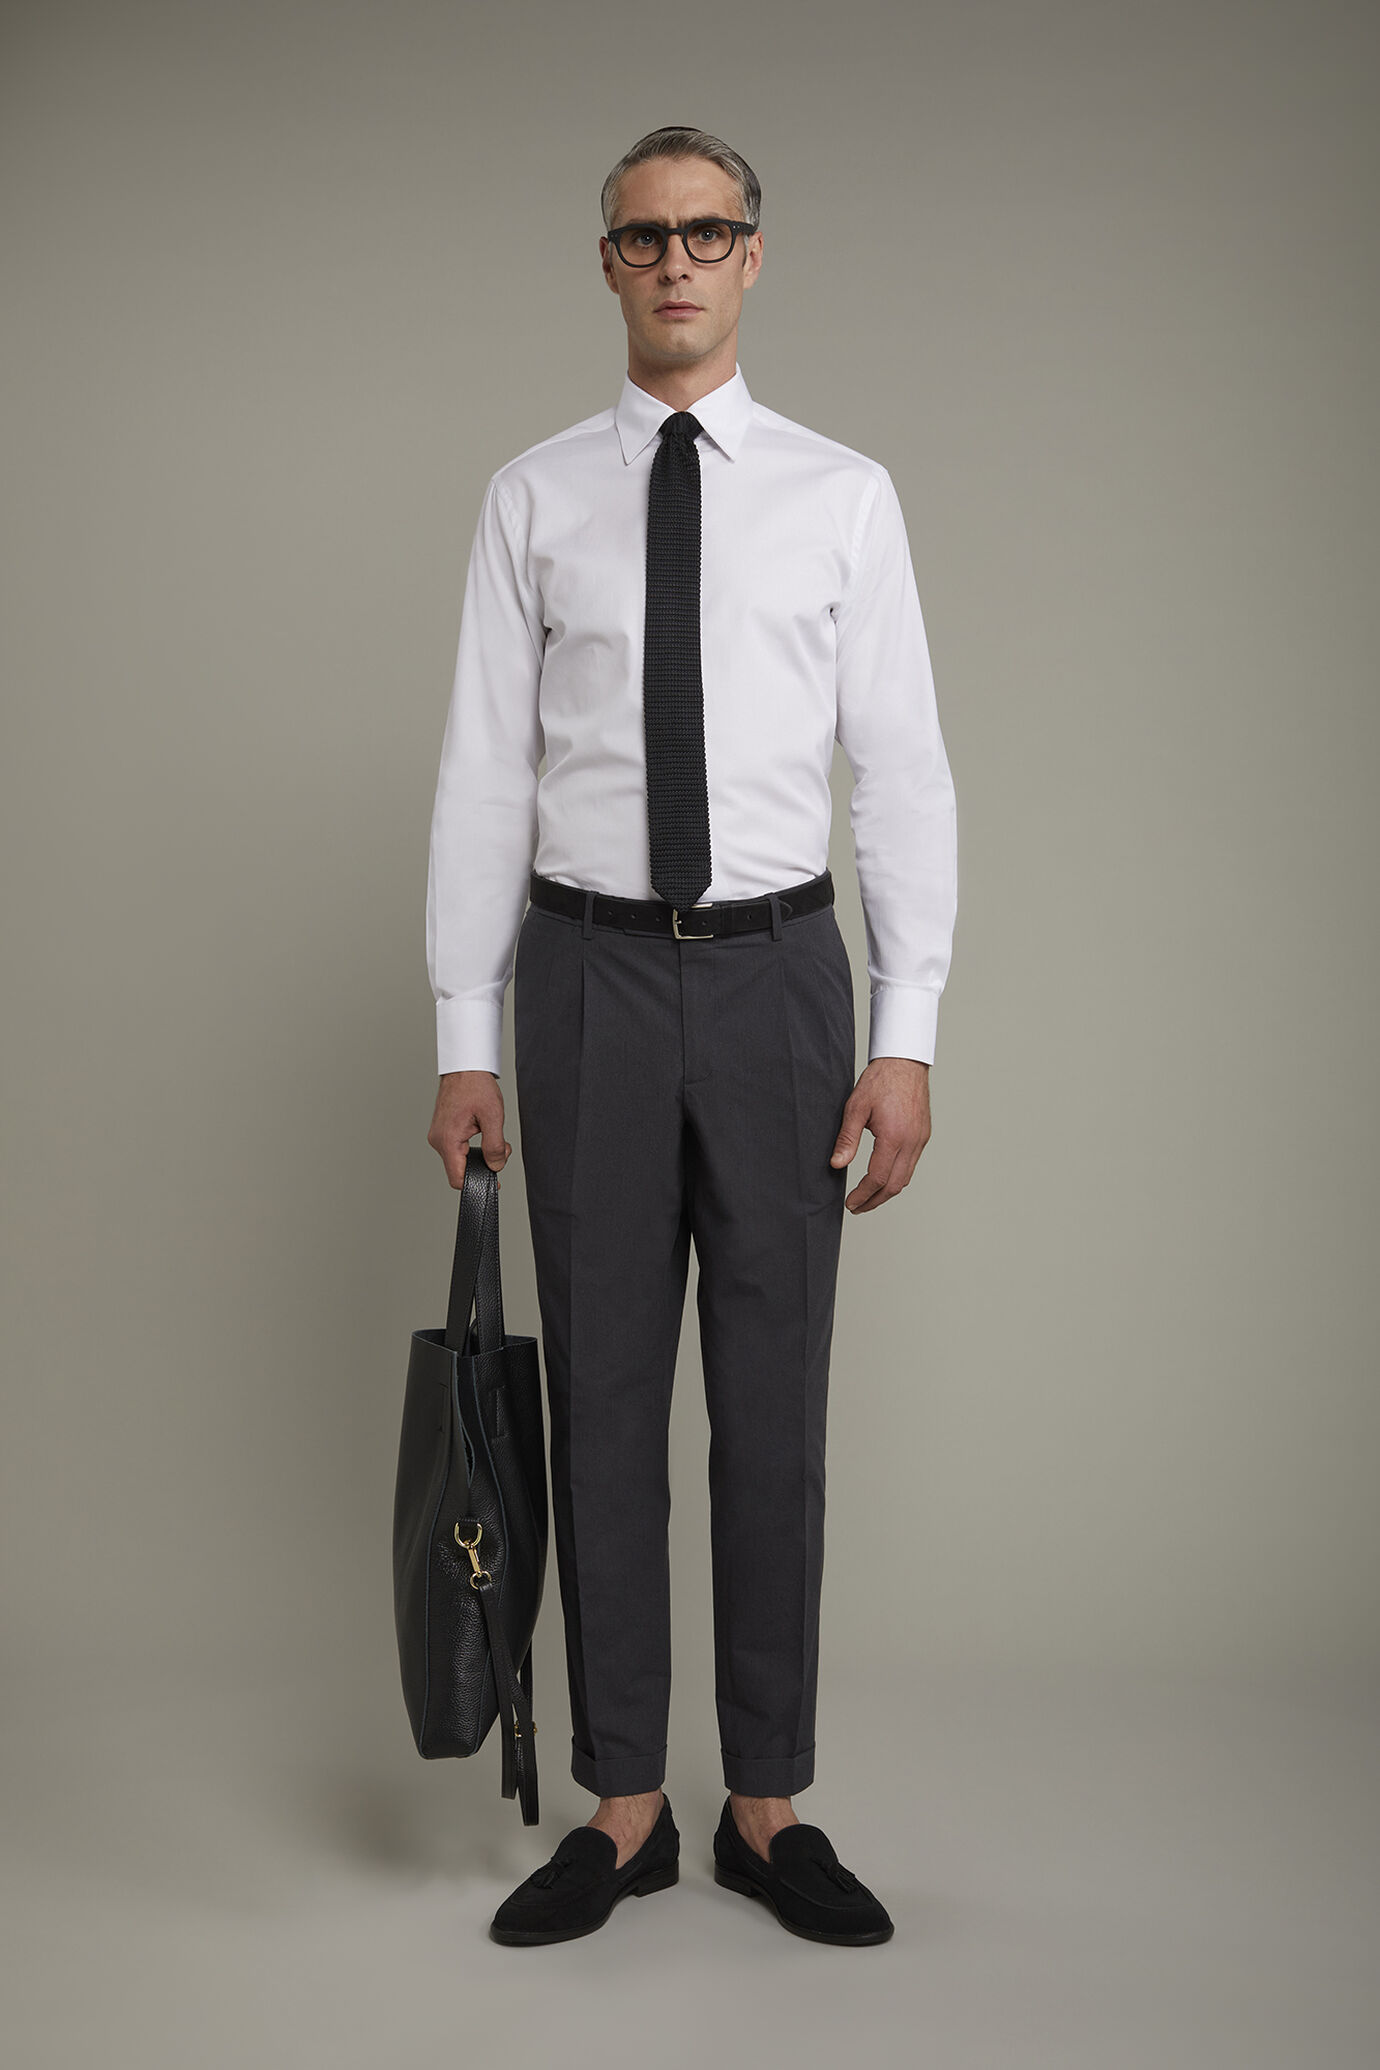 Men’s classic trousers with double pleats in flamed effect fabric regular fit